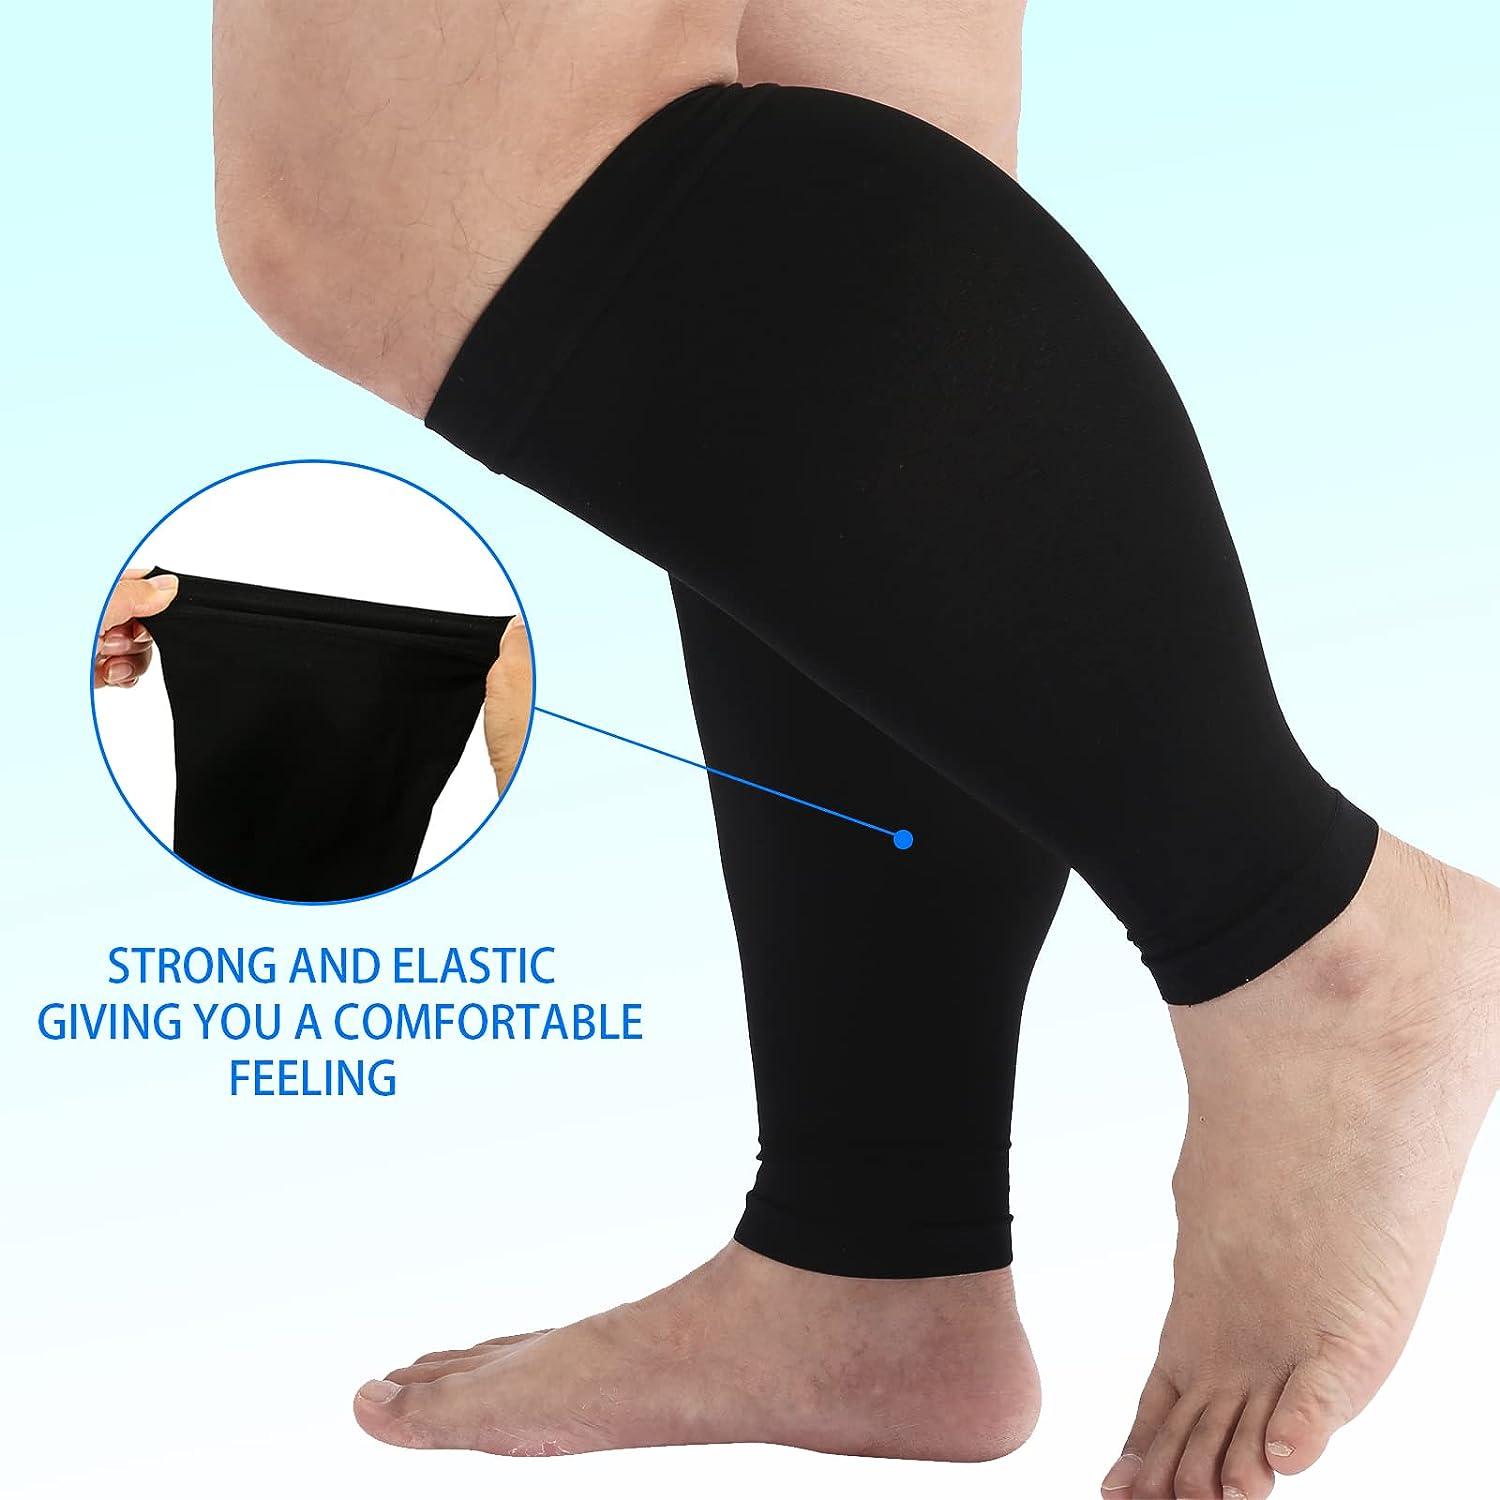 1Pair Sports Calf Support Sleeves Leg Footless Compression Socks for  Splints, Varicose Veins, Lymphedema, Running, Cycling - AliExpress